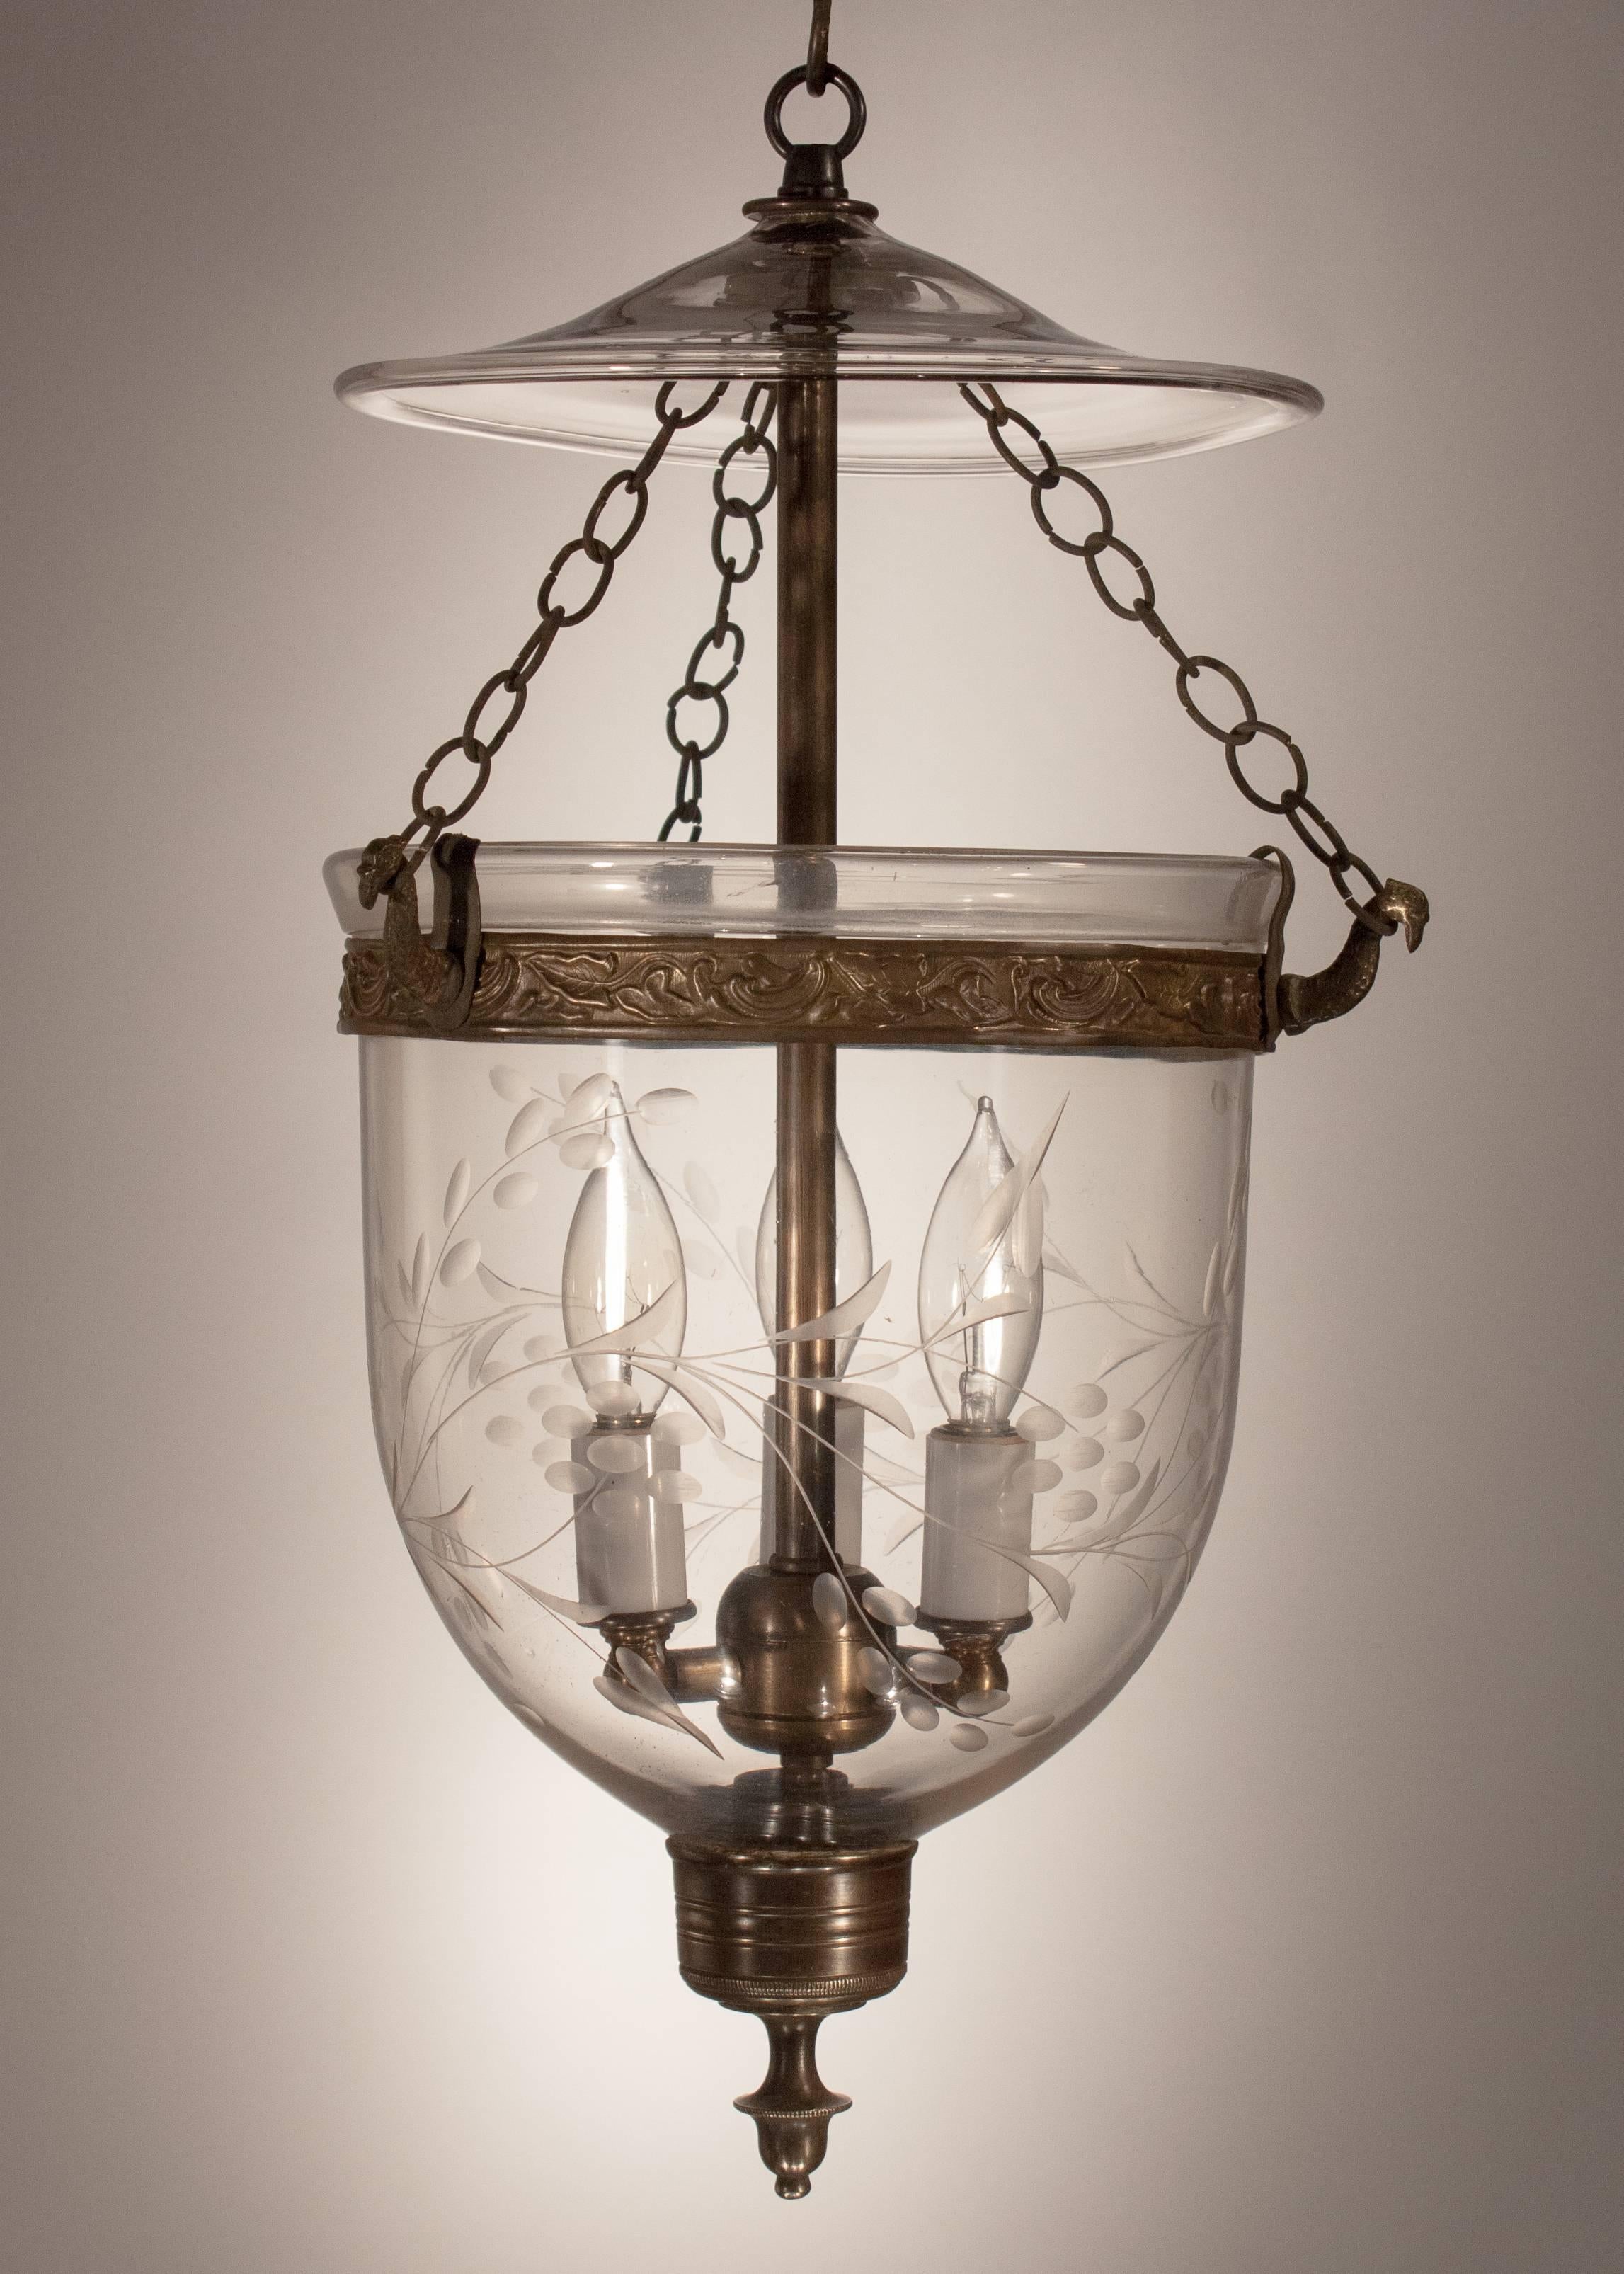 A smaller-sized English bell jar lantern, circa 1870, with a meandering etched vine design that suits this charming hall lantern beautifully. The quality of the hand blown glass is of outstanding and the bell jar makes a clear tone when